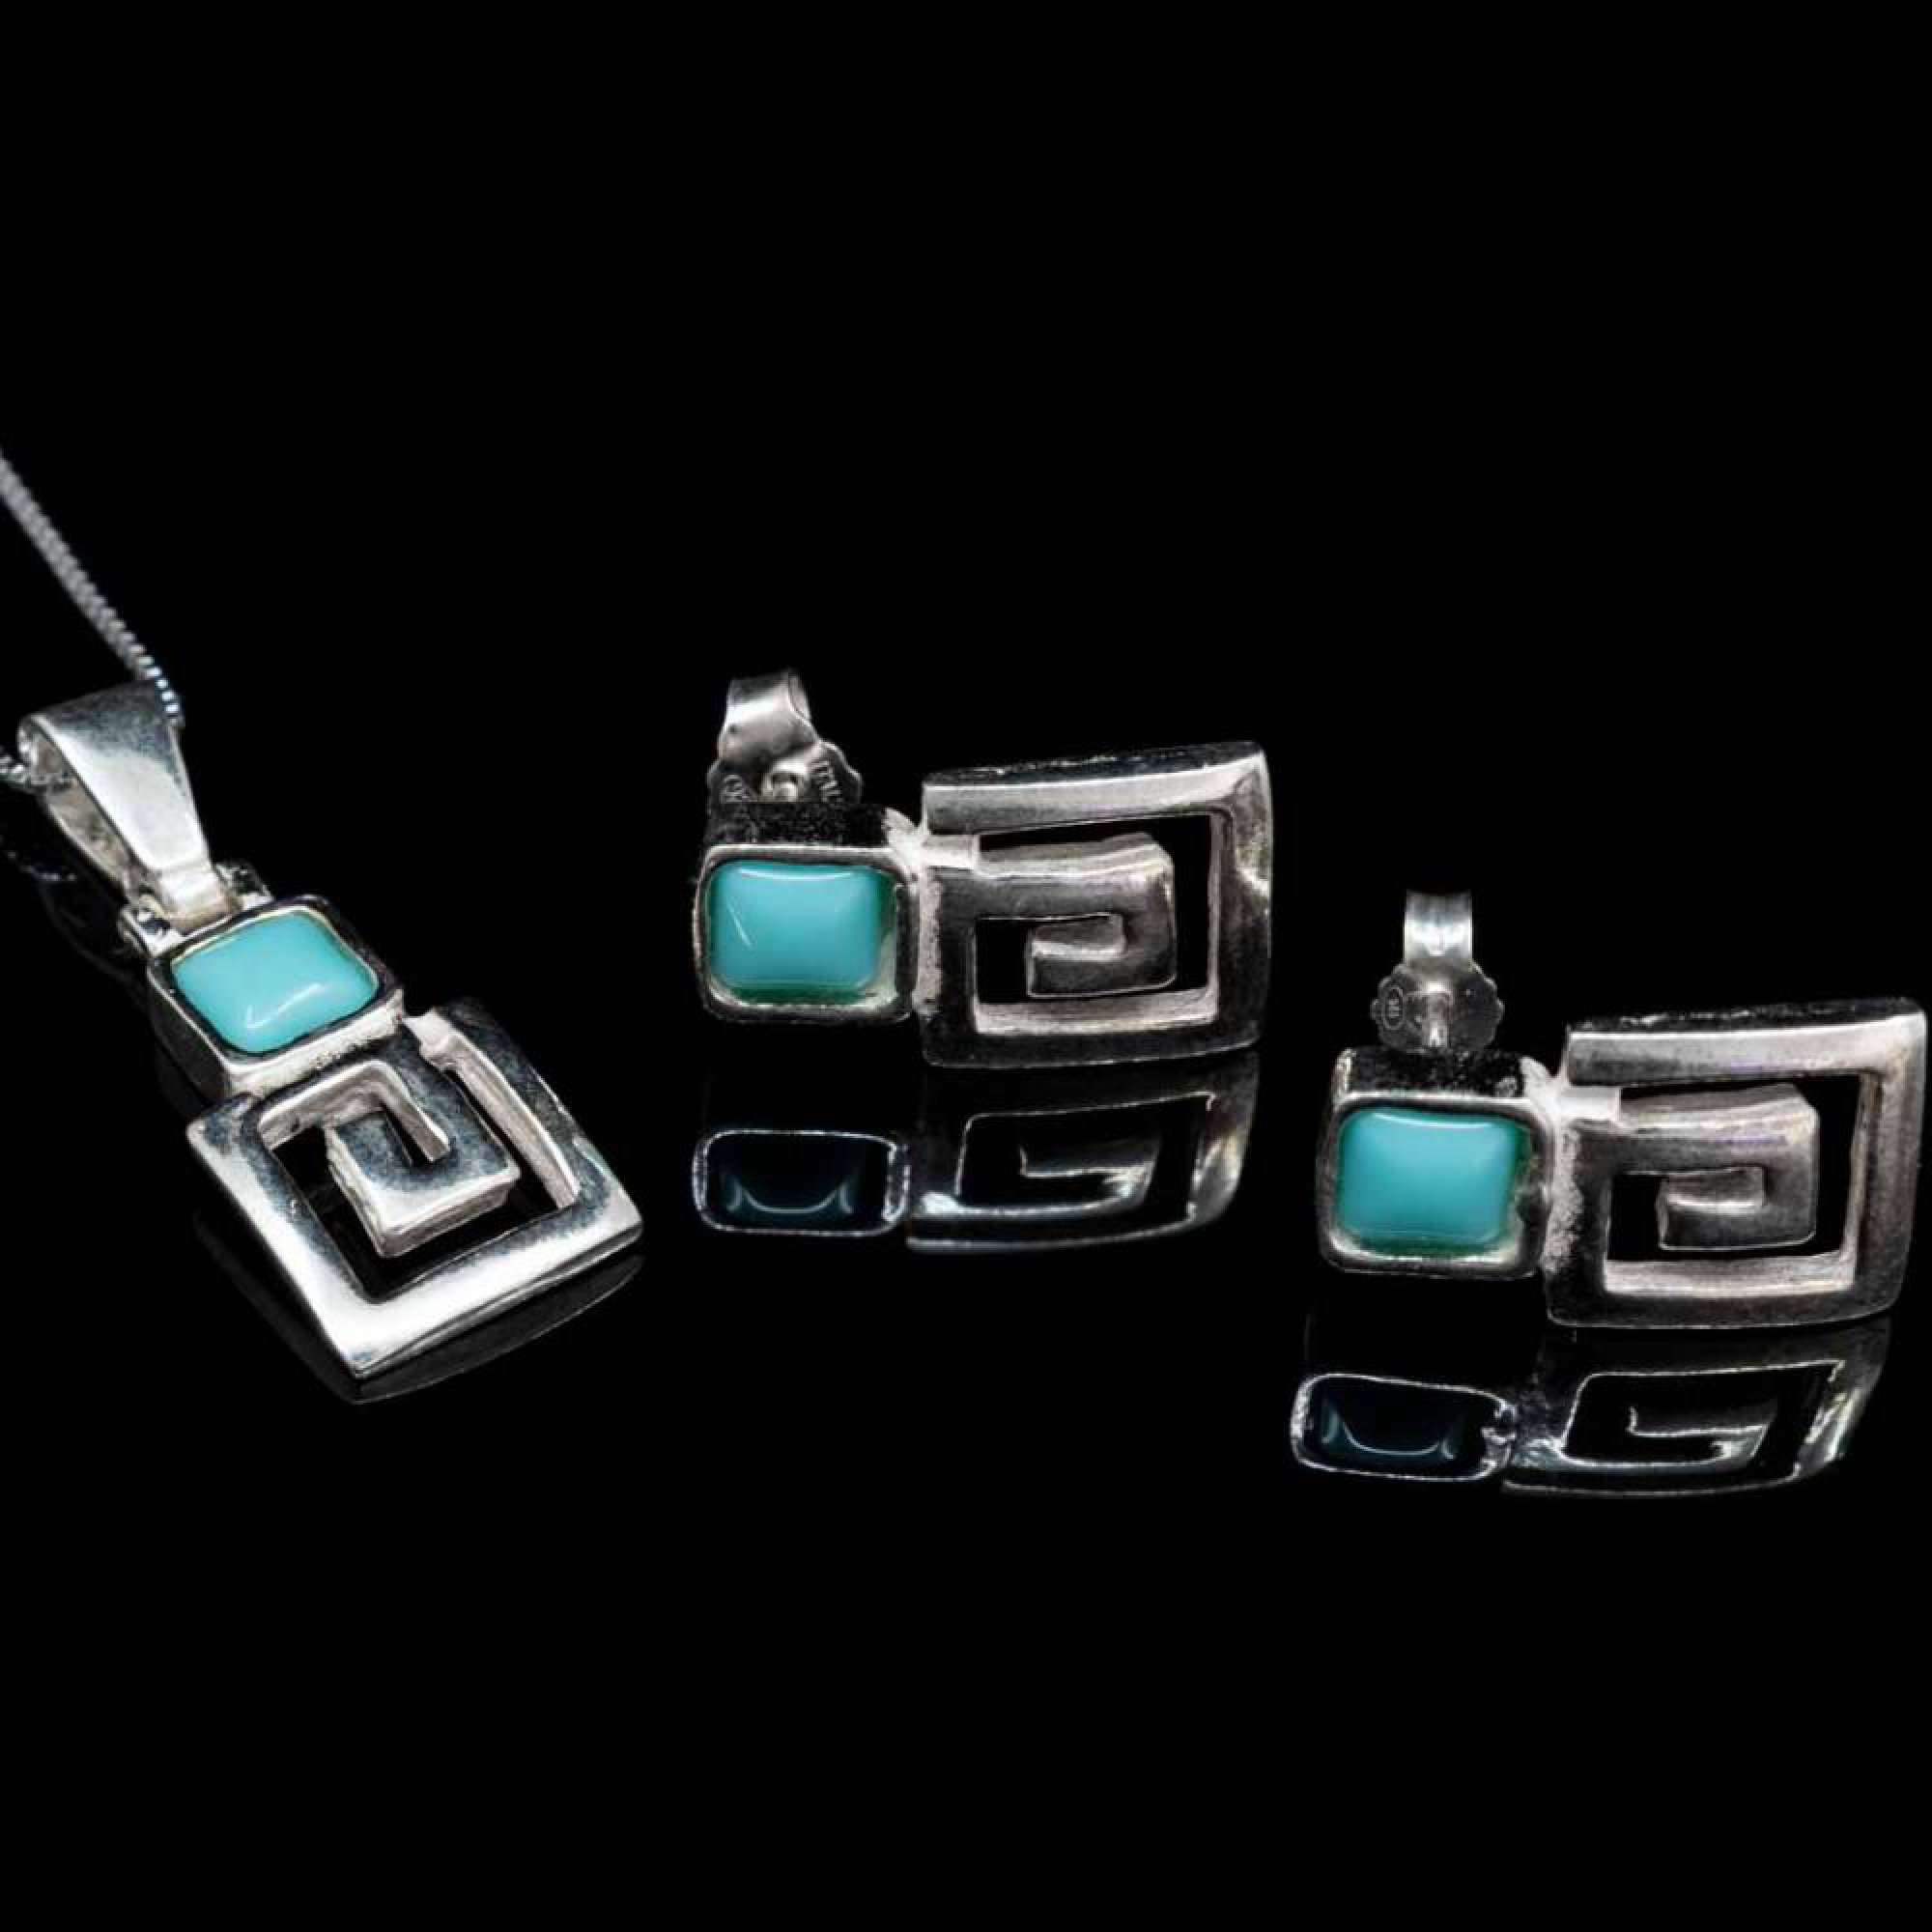 Meander set with turquoise stones